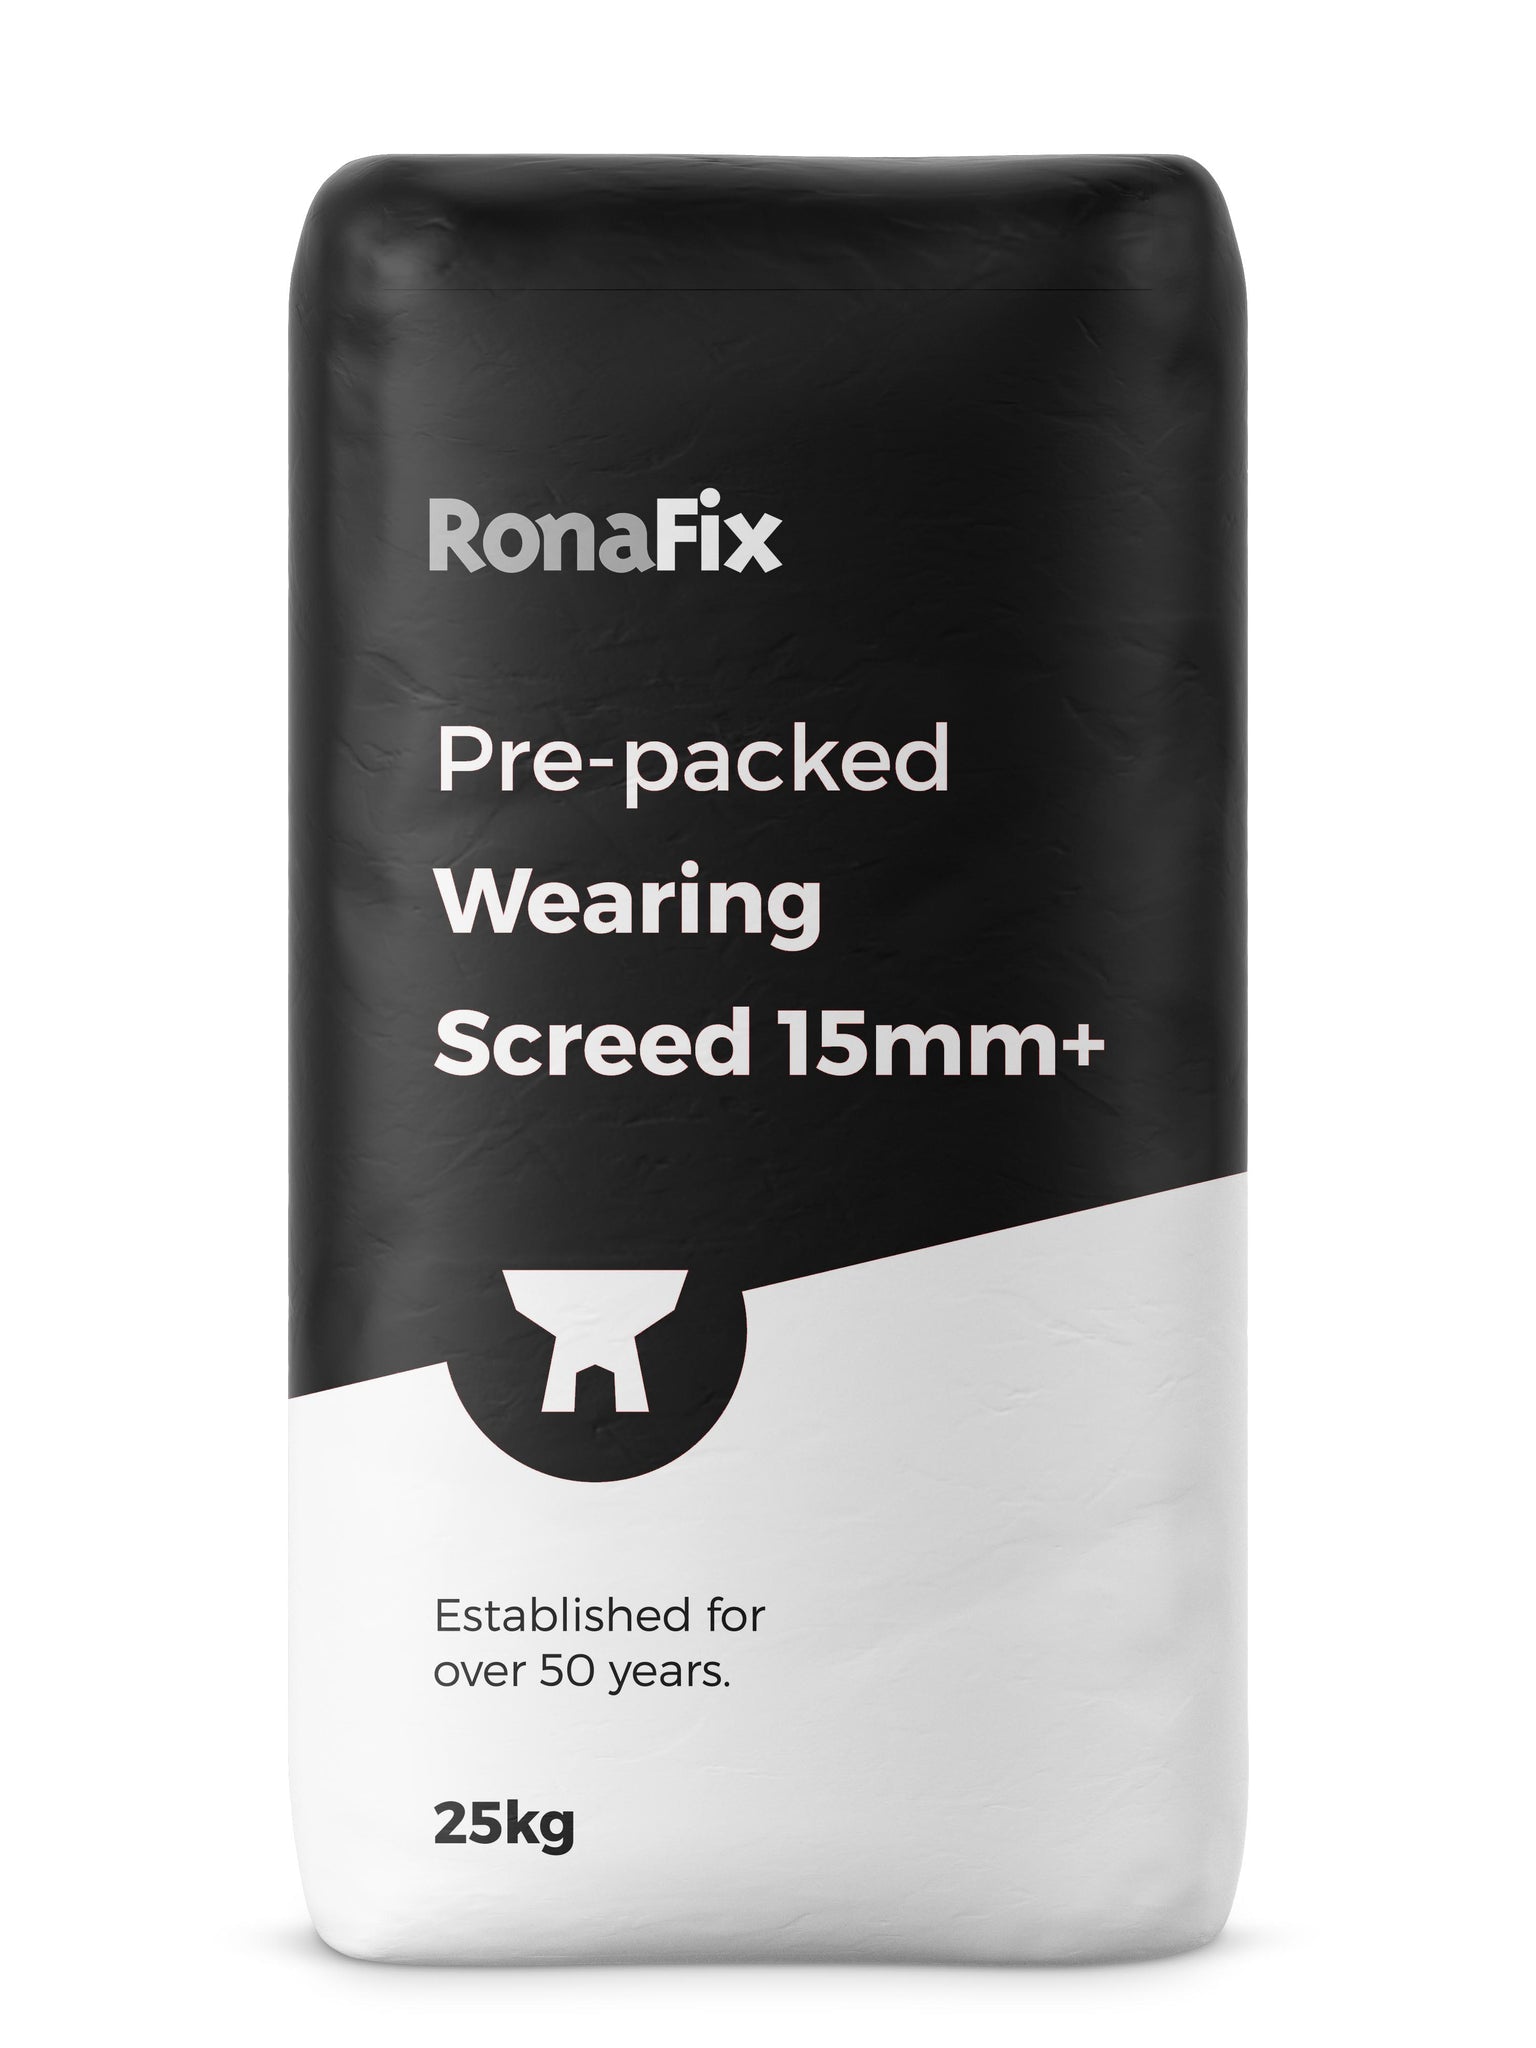 Ronafix Pre-packed Wearing Screed 15mm+